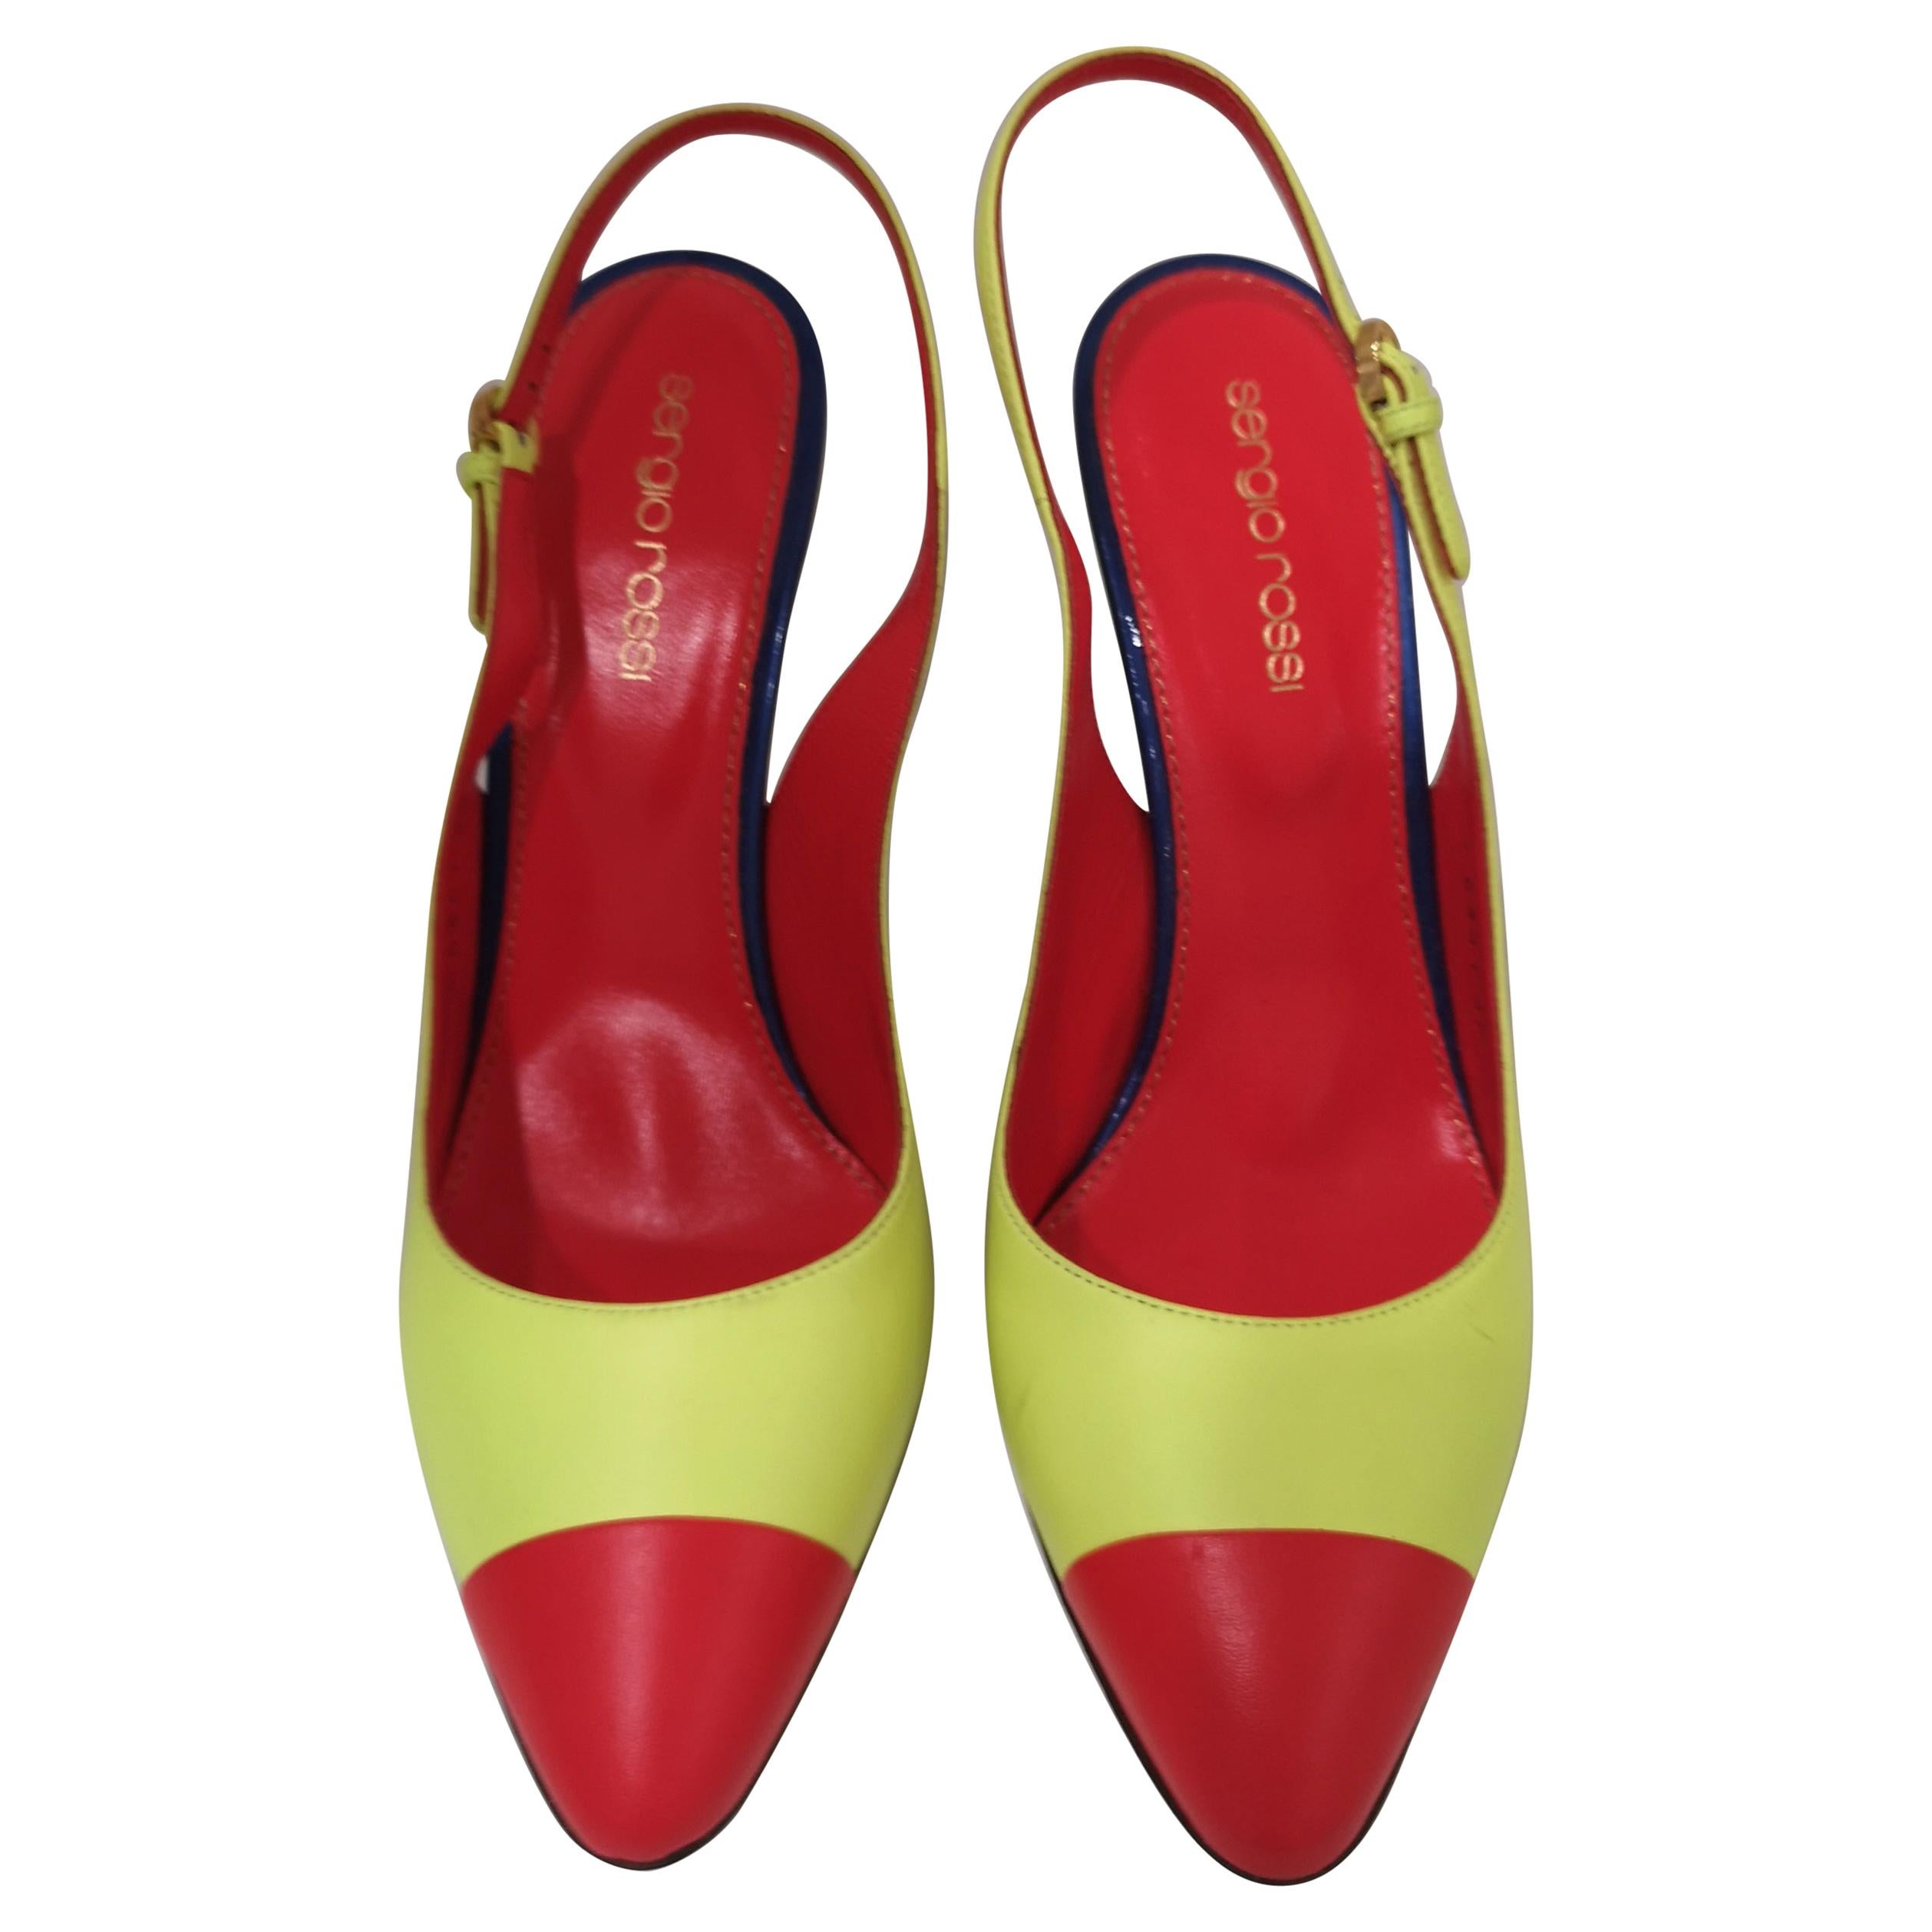 Sergio Rossi Red Blue Fluo Yellow Decollete